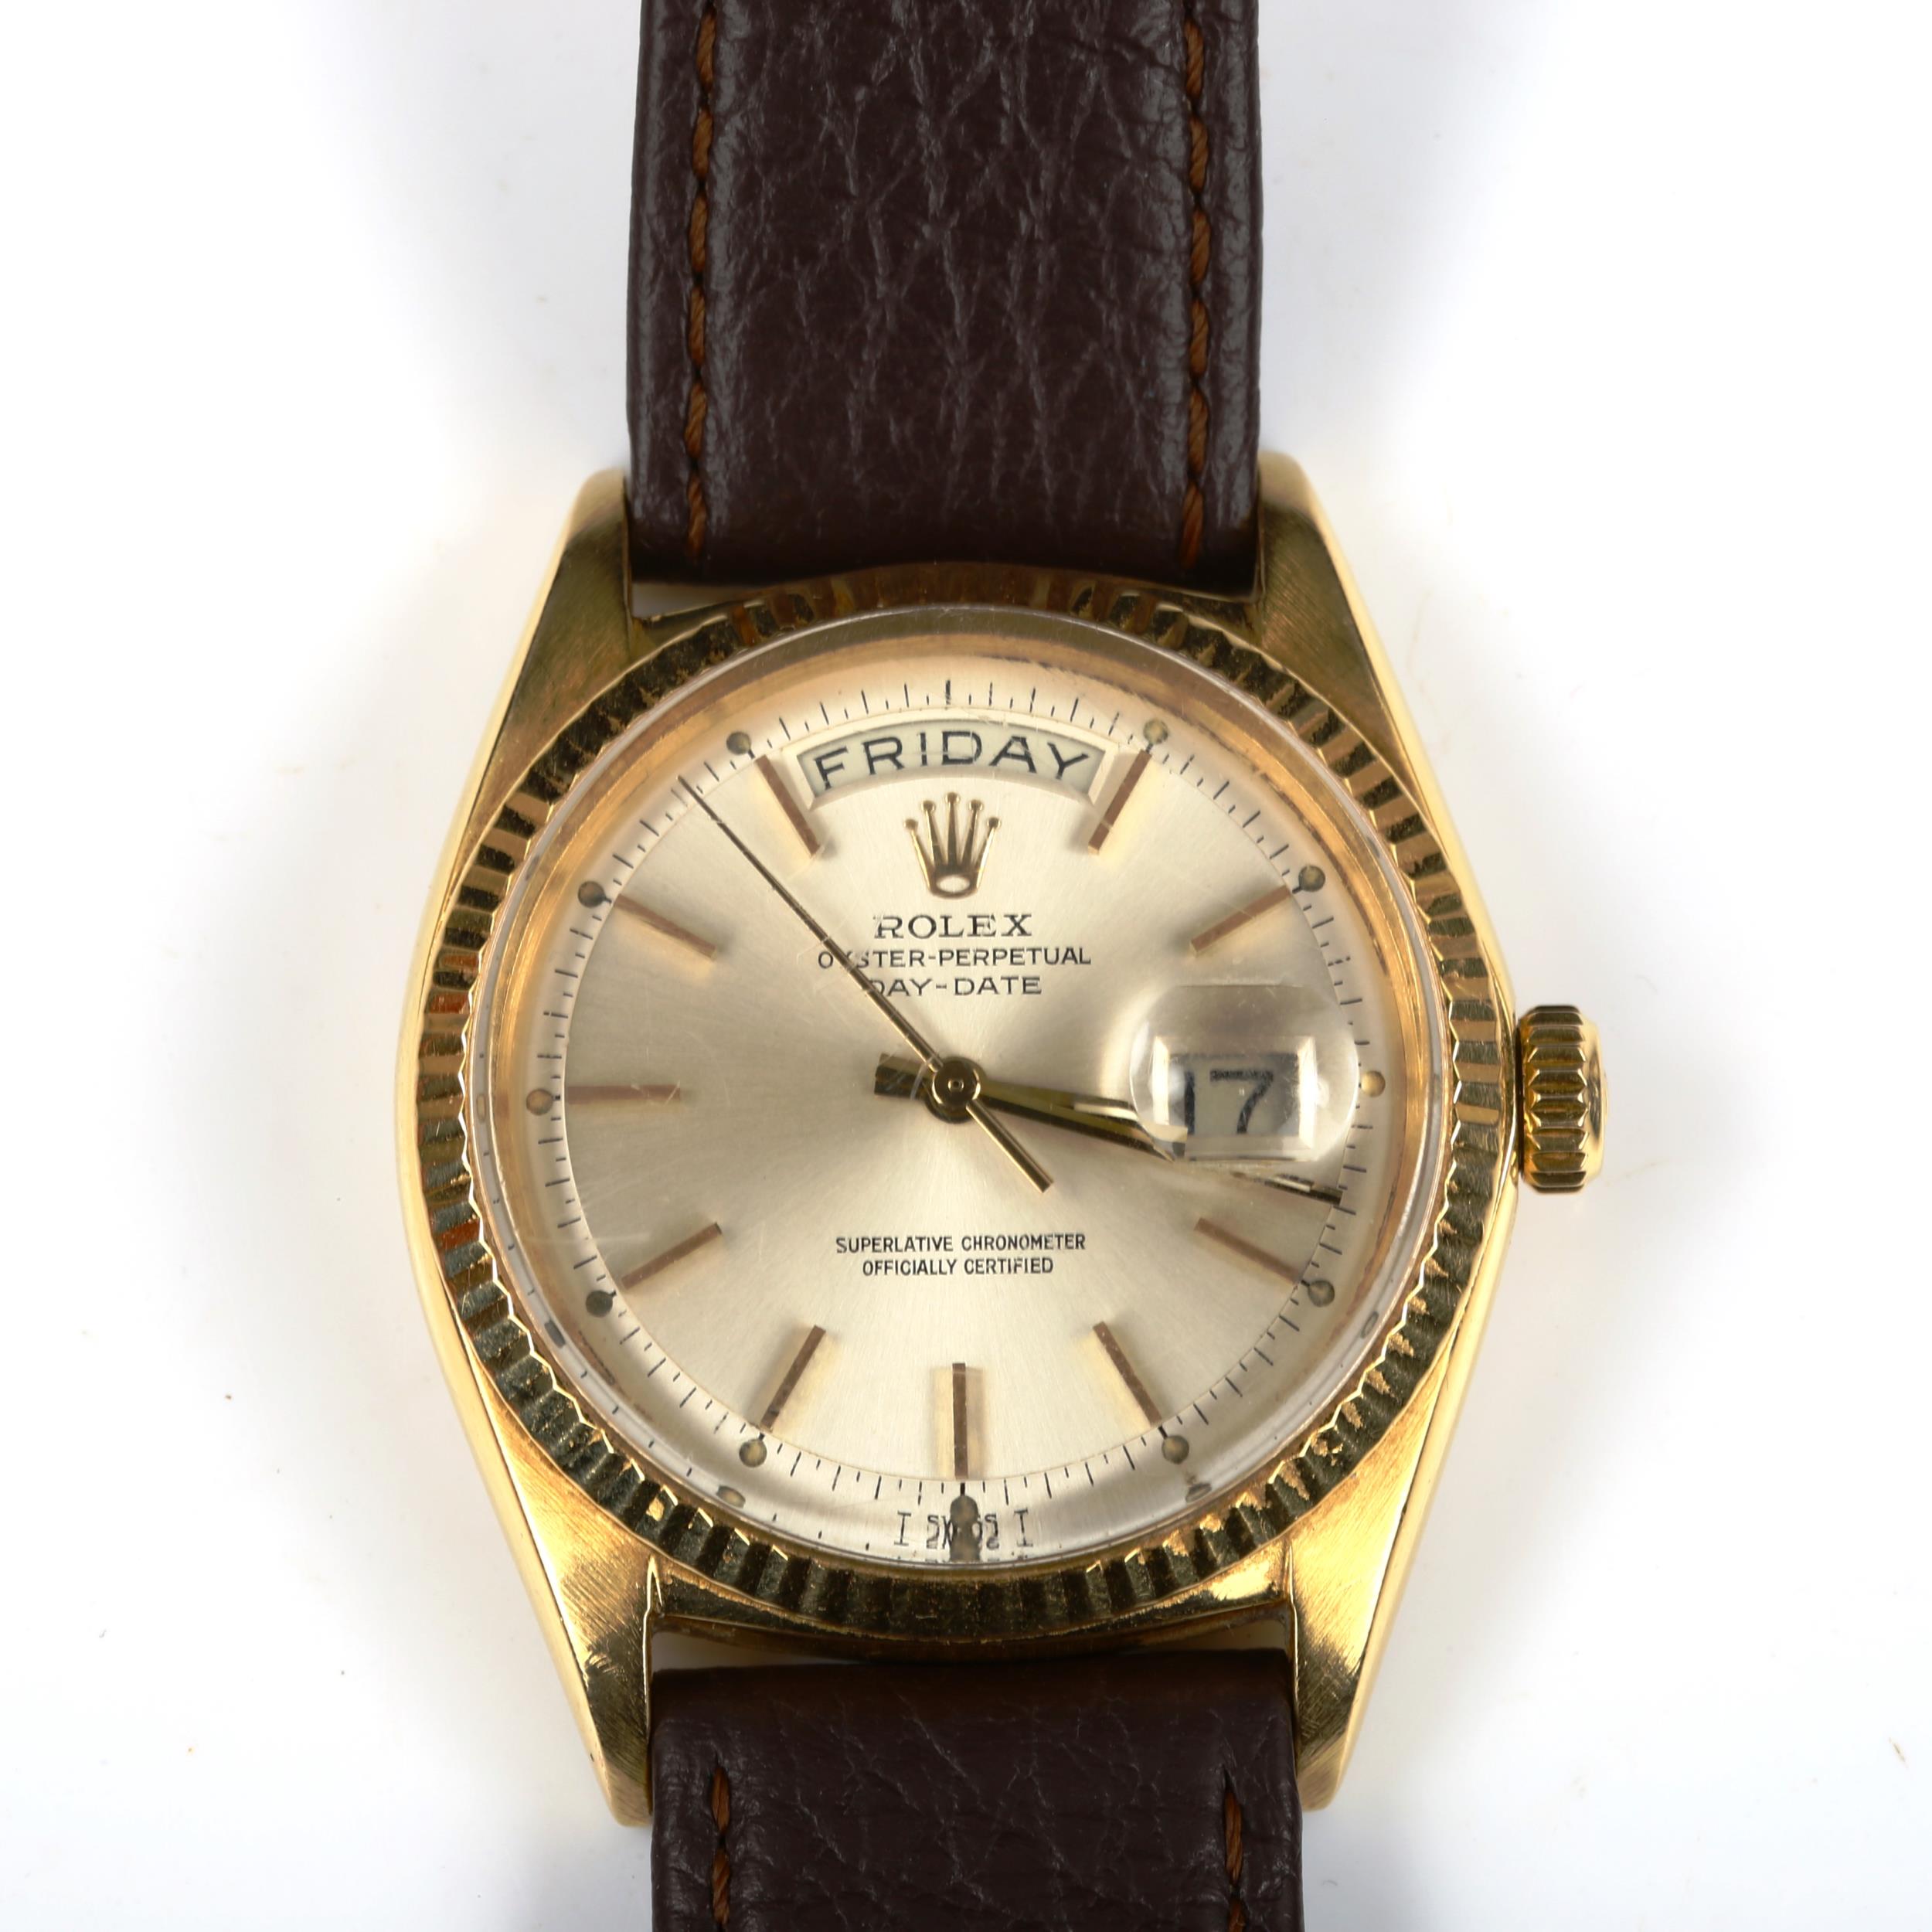 ROLEX - an 18ct gold Oyster perpetual day-date automatic wristwatch, ref. 1803, circa 1966, silvered